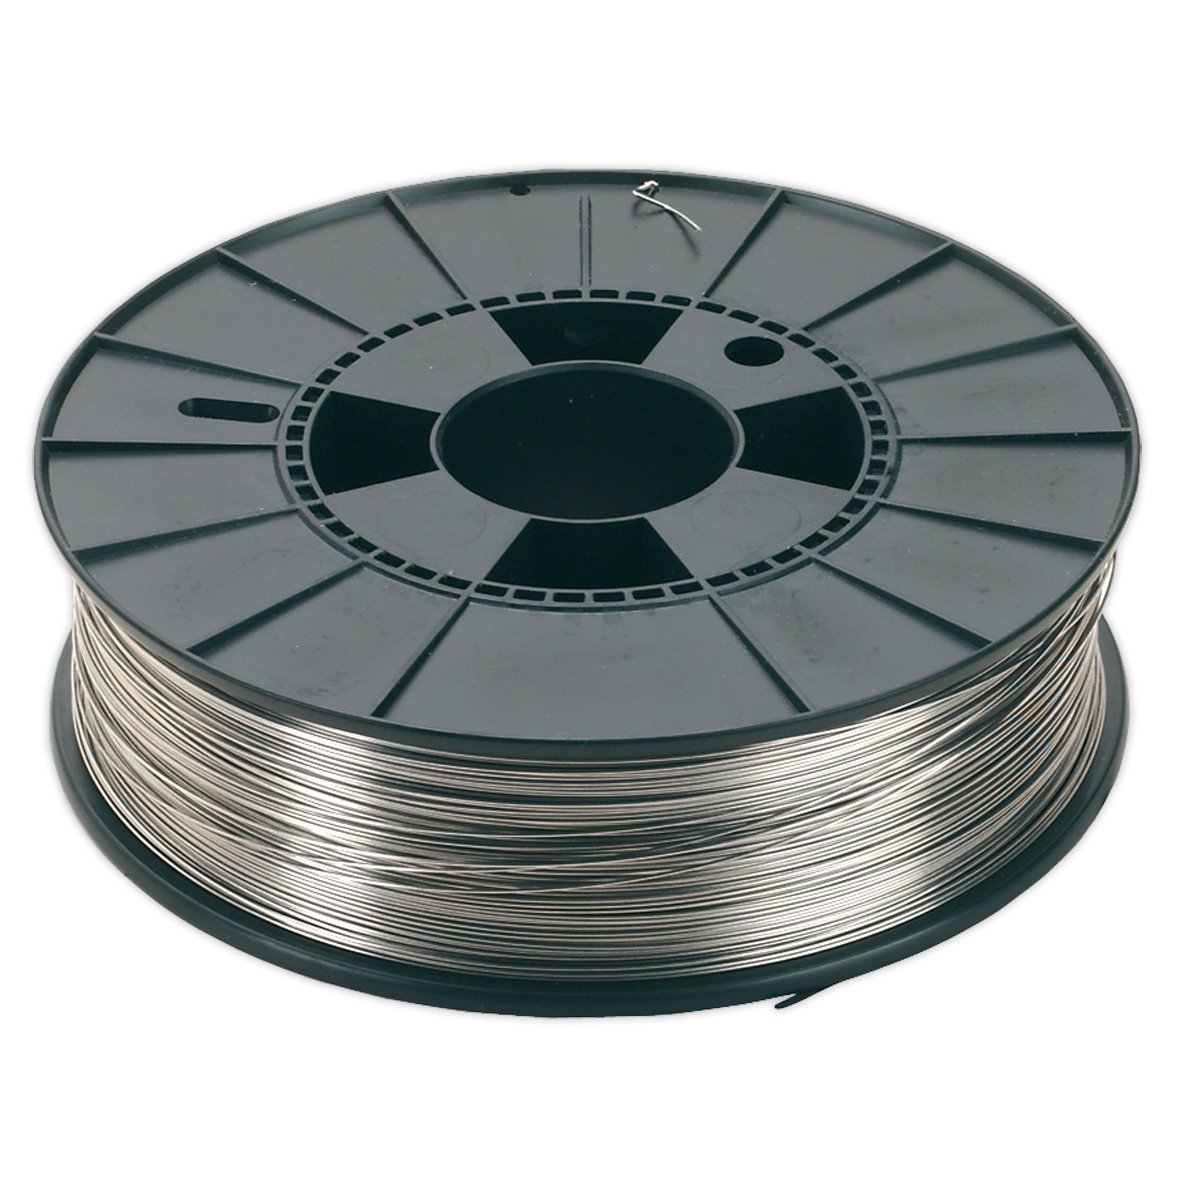 Stainless Steel MIG Wire 5kg 0.8mm 308(S)93 Grade